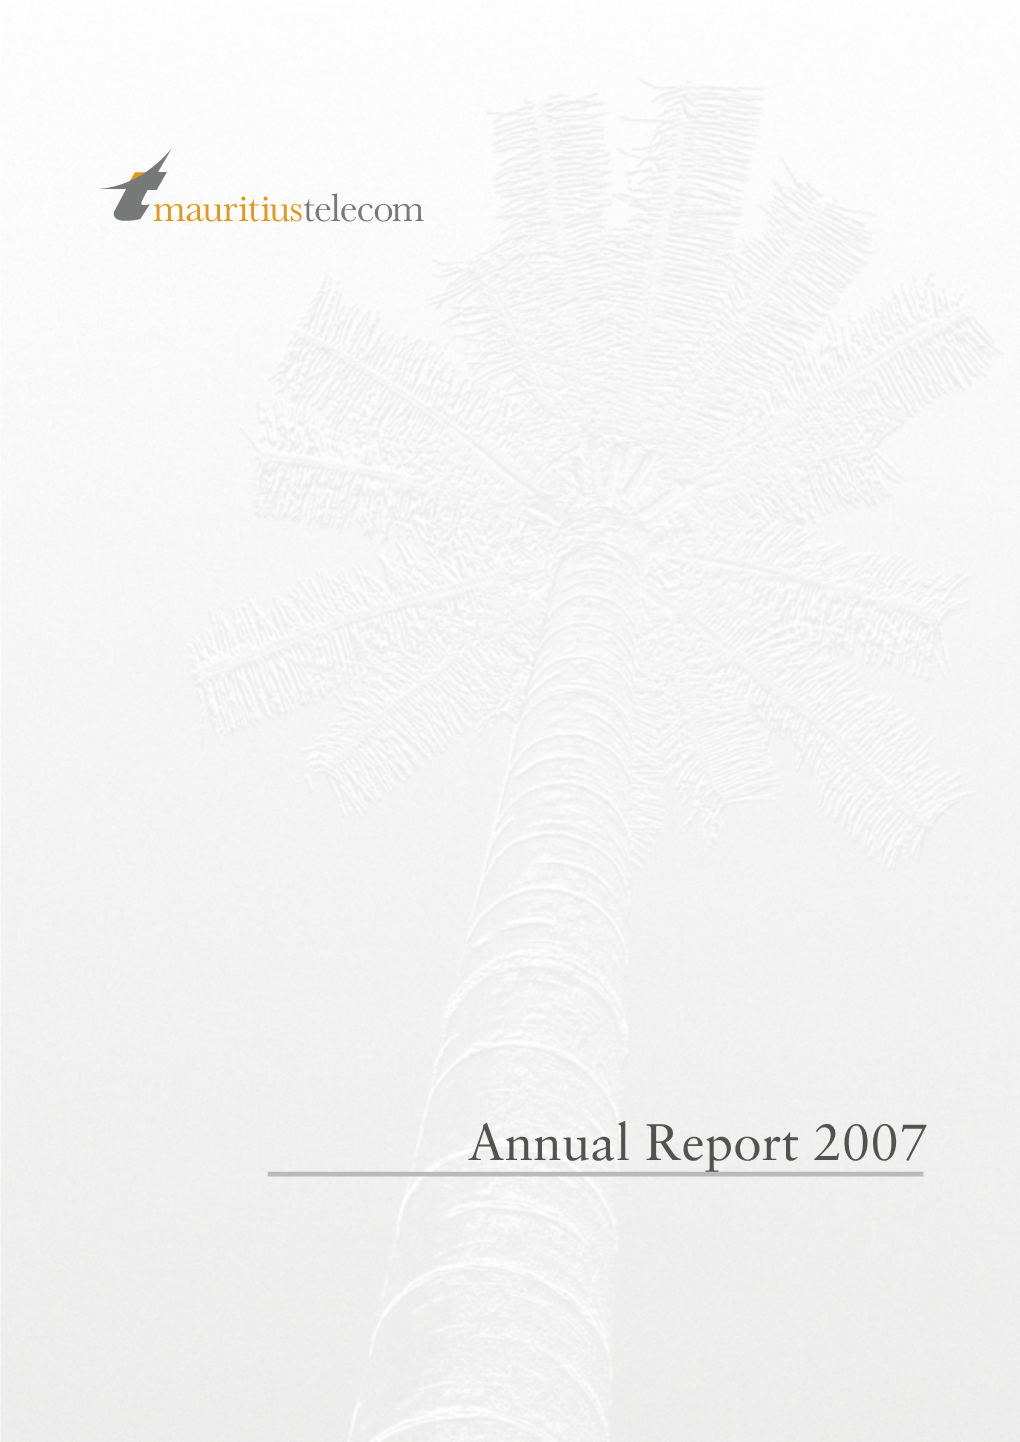 Mauritius Telecom Annual Report 2007 Financial Highlights for the Year Ended 31 December 2007